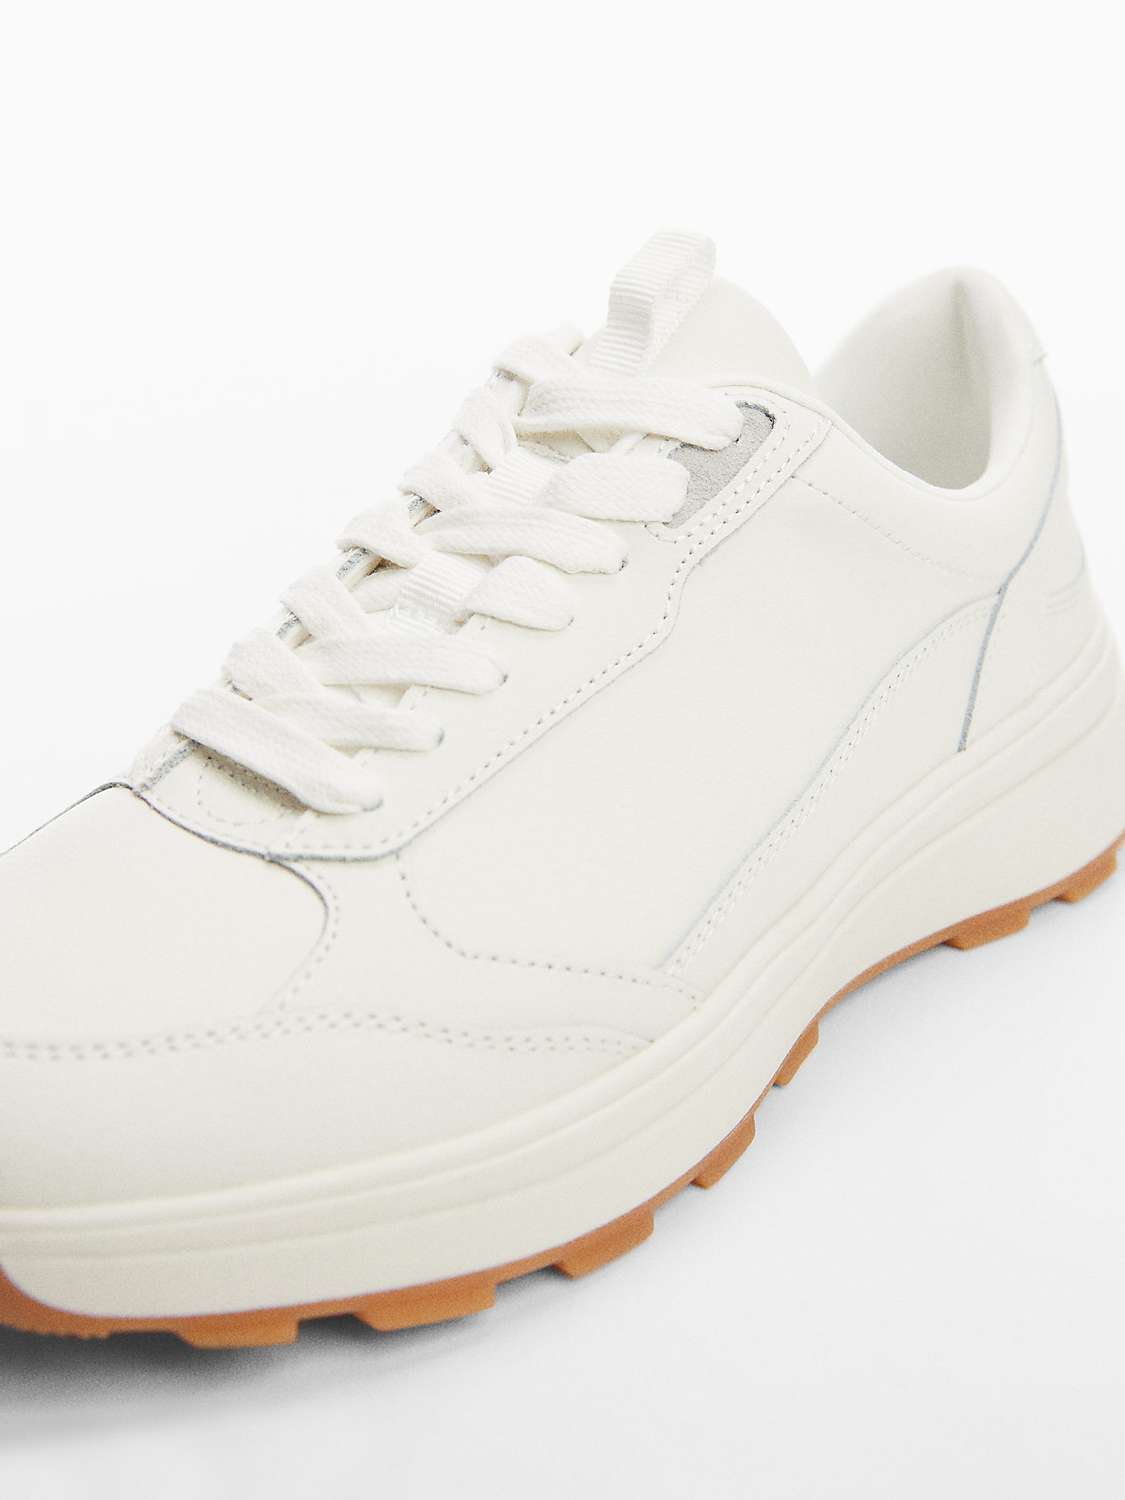 Buy Mango Run Leather Mix Lace-Up Trainers, White Online at johnlewis.com